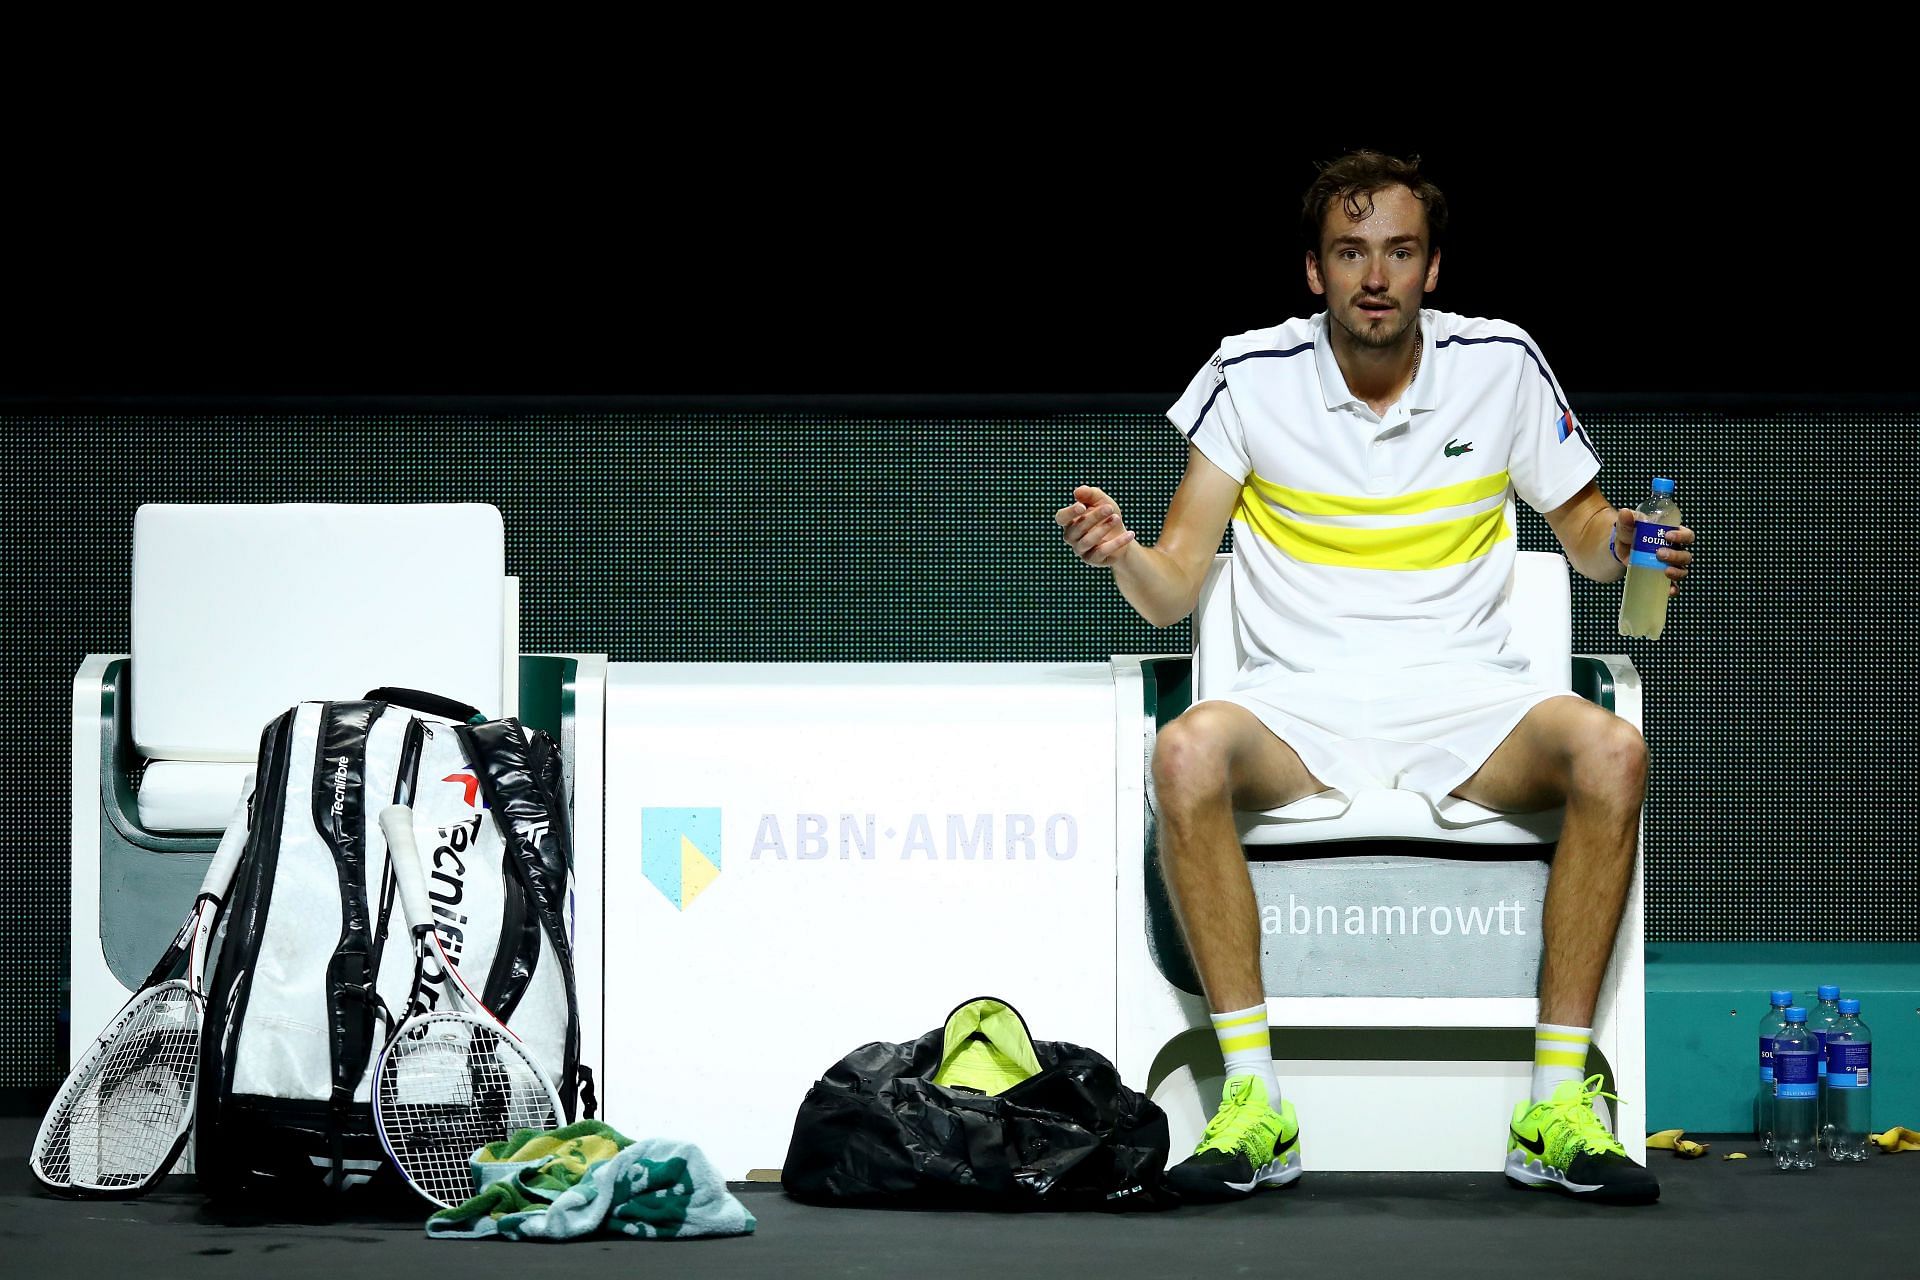 Daniil Medvedev reacts to the loss of a set